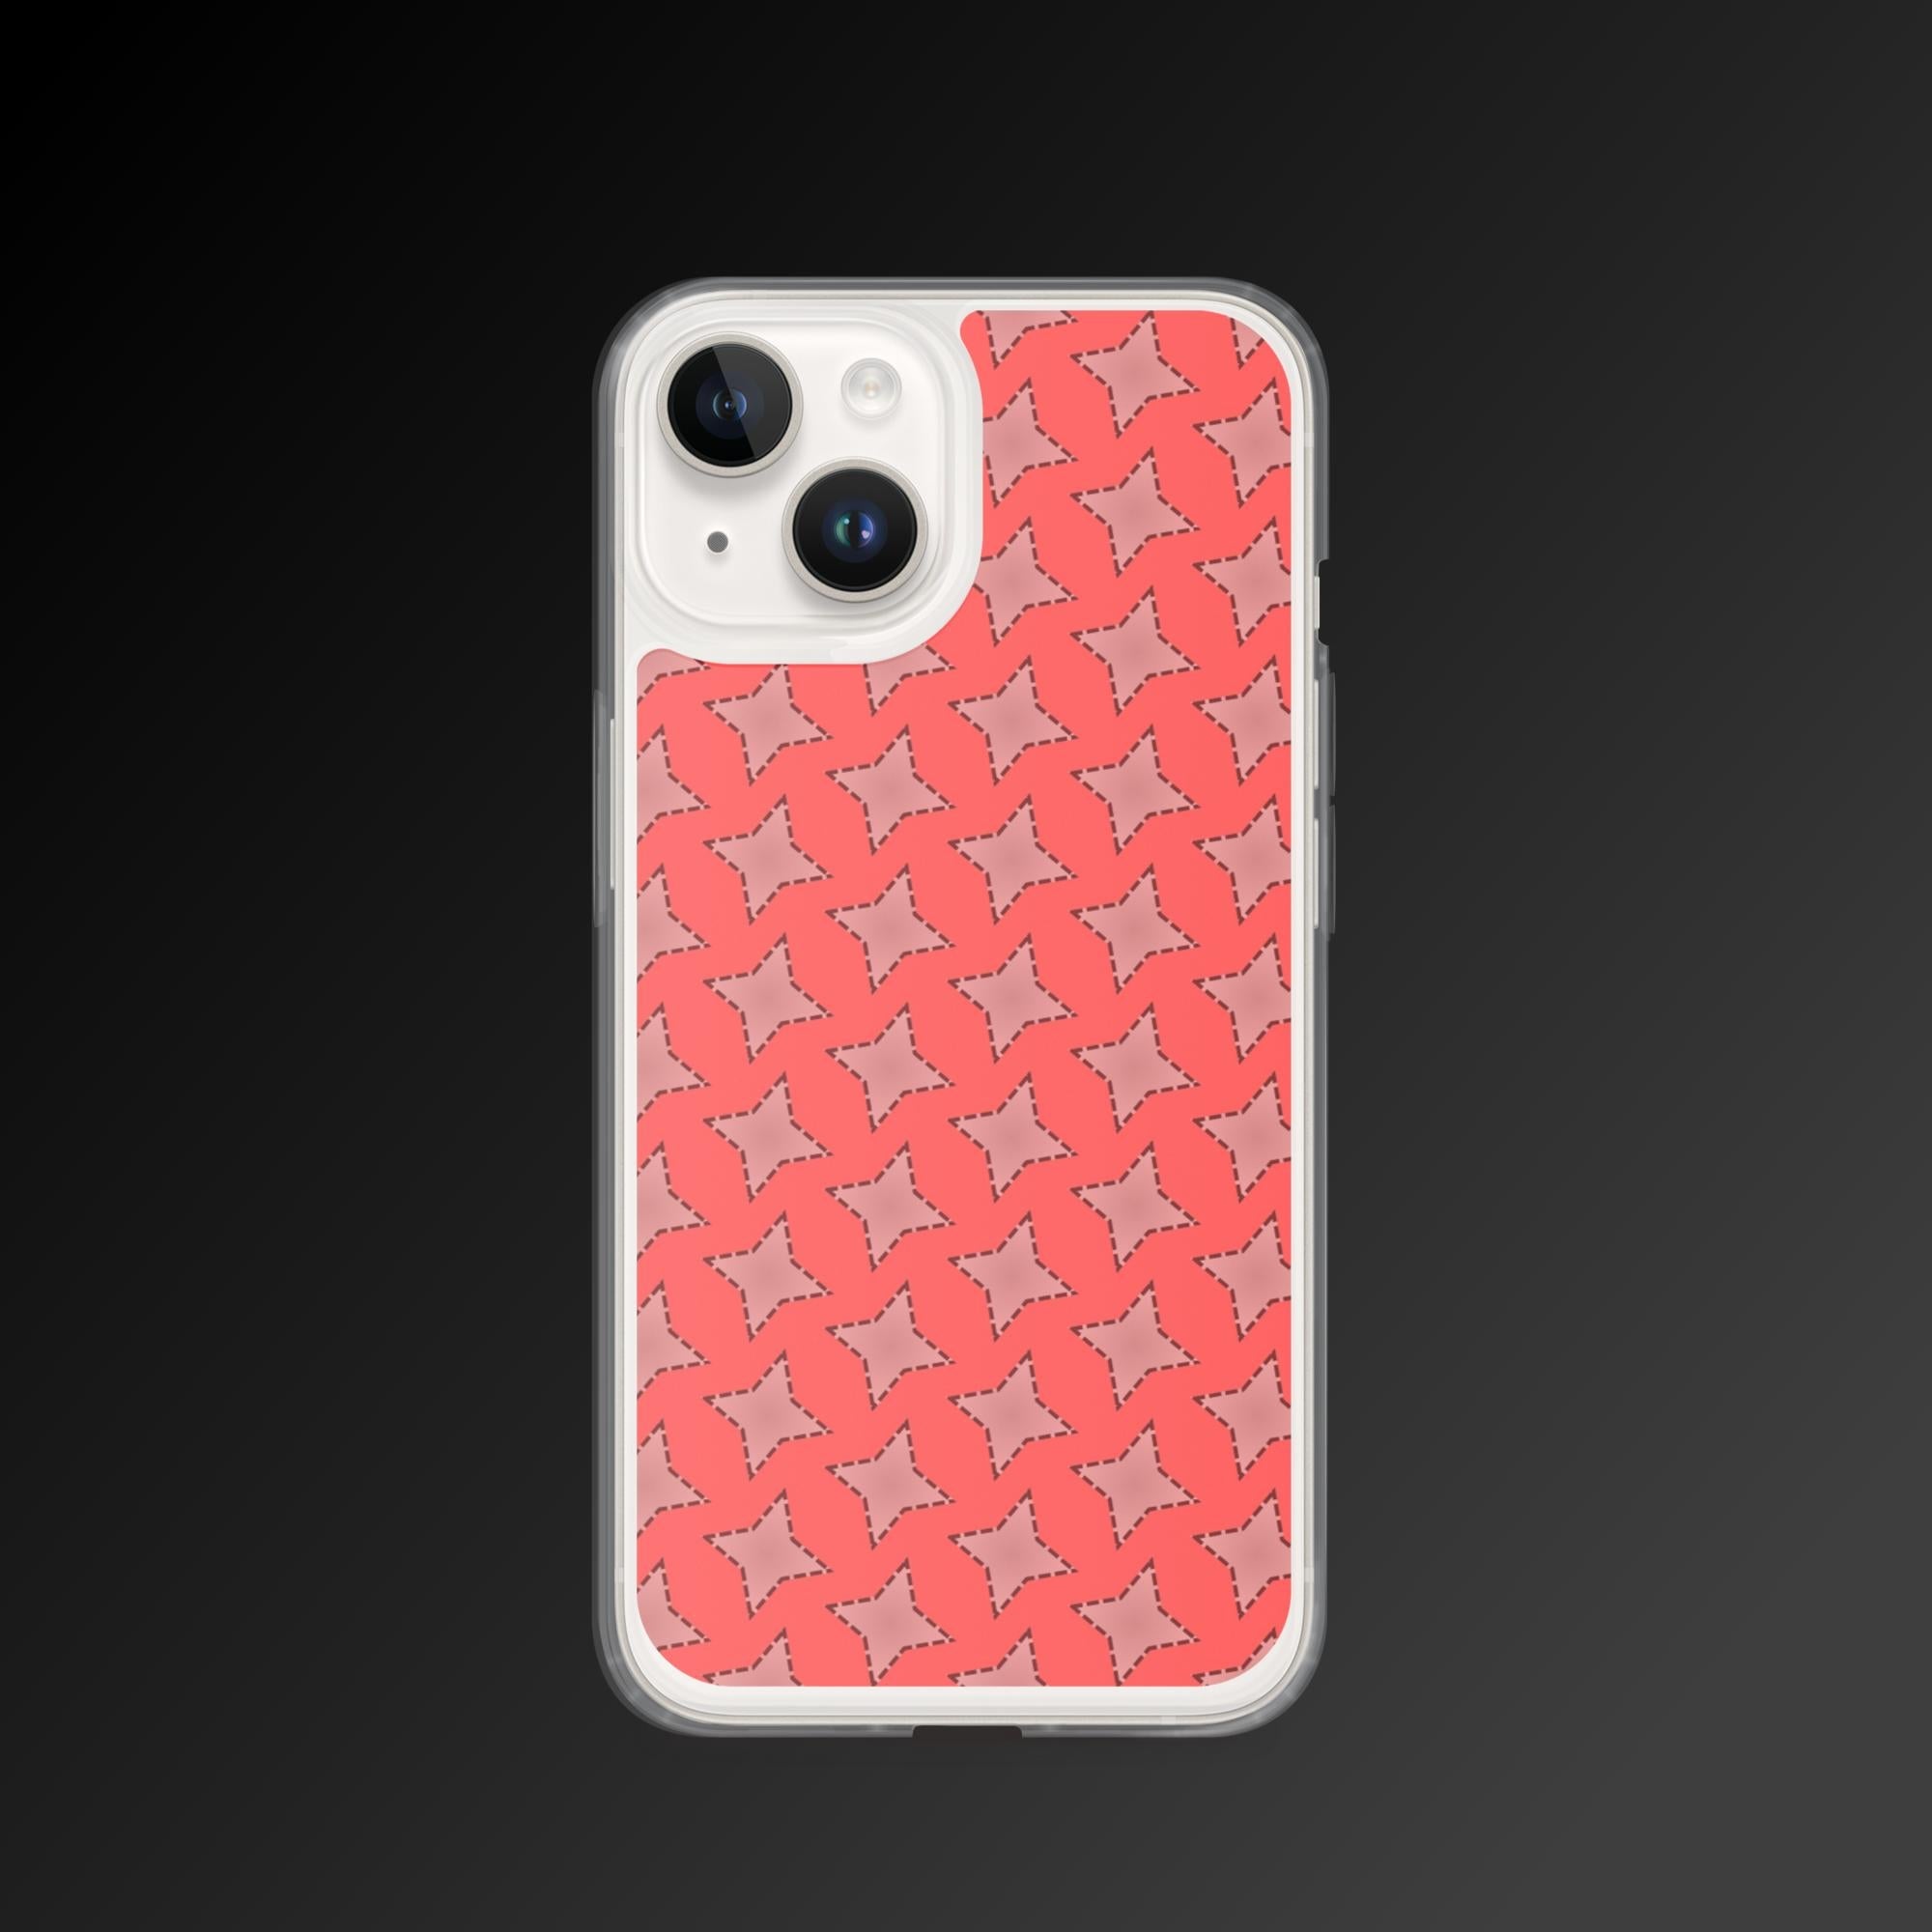 "Ninja star pattern" clear iphone case - Clear iphone case - Ever colorful